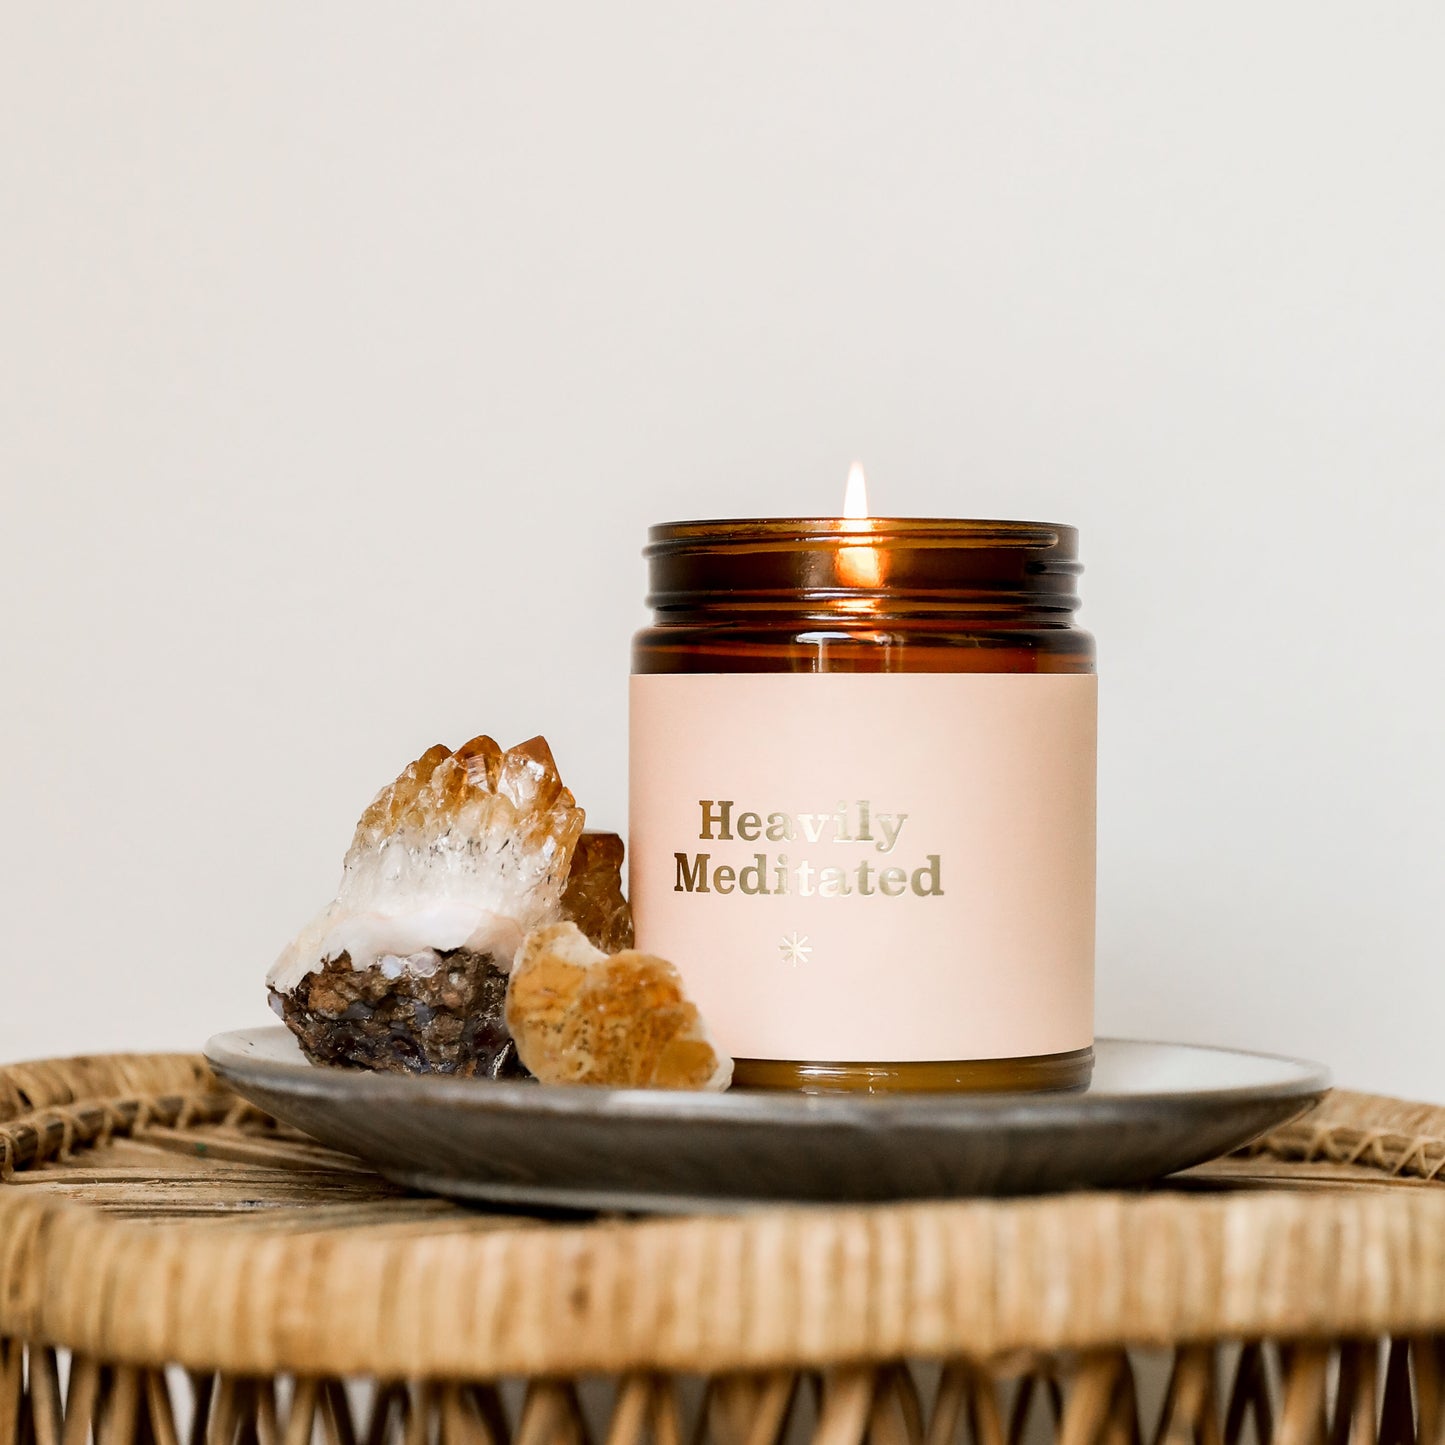 Mantra Candle - Heavily Meditated